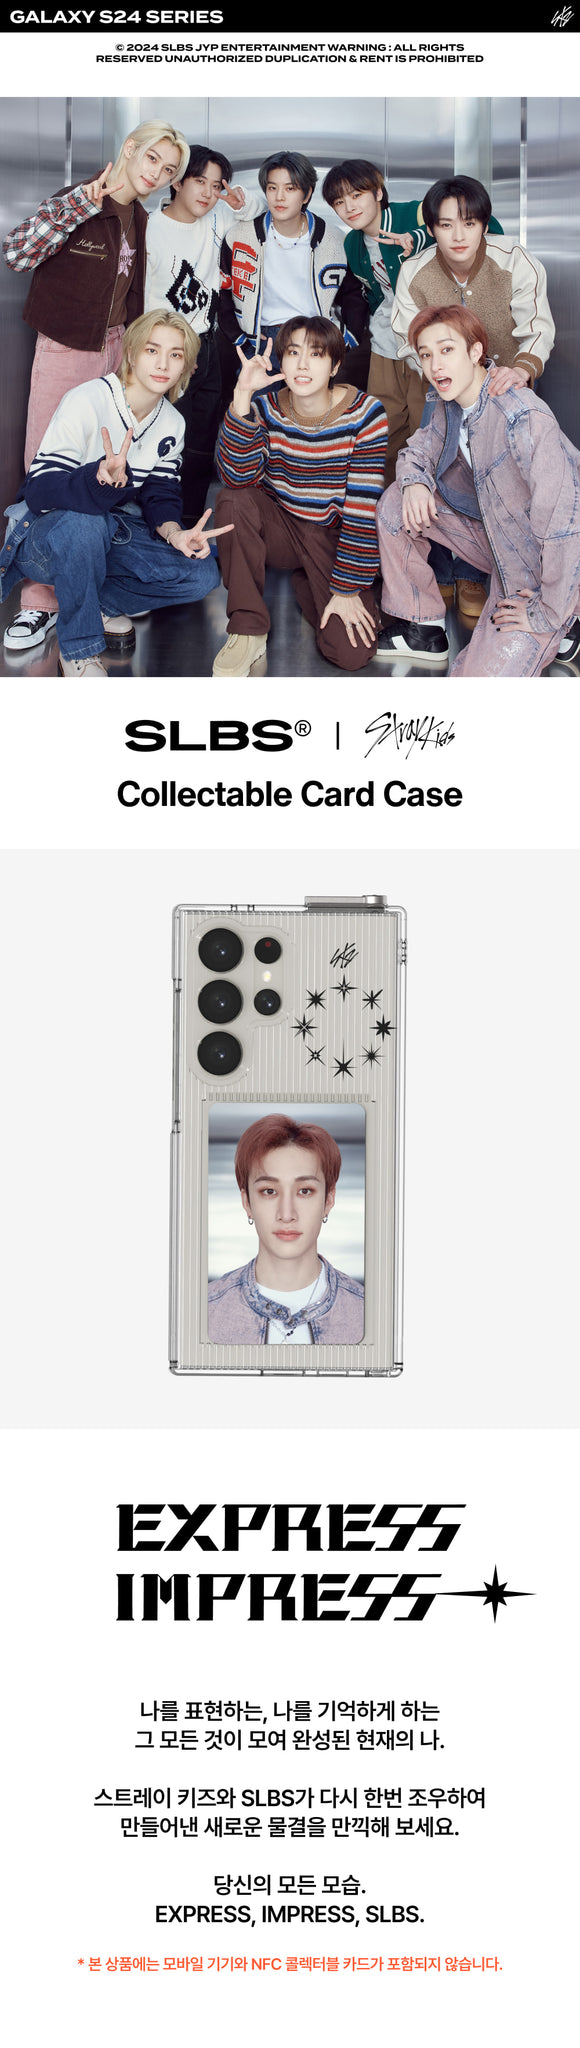 Stray Kids Collectable Phone Case for Galaxy S24 Series